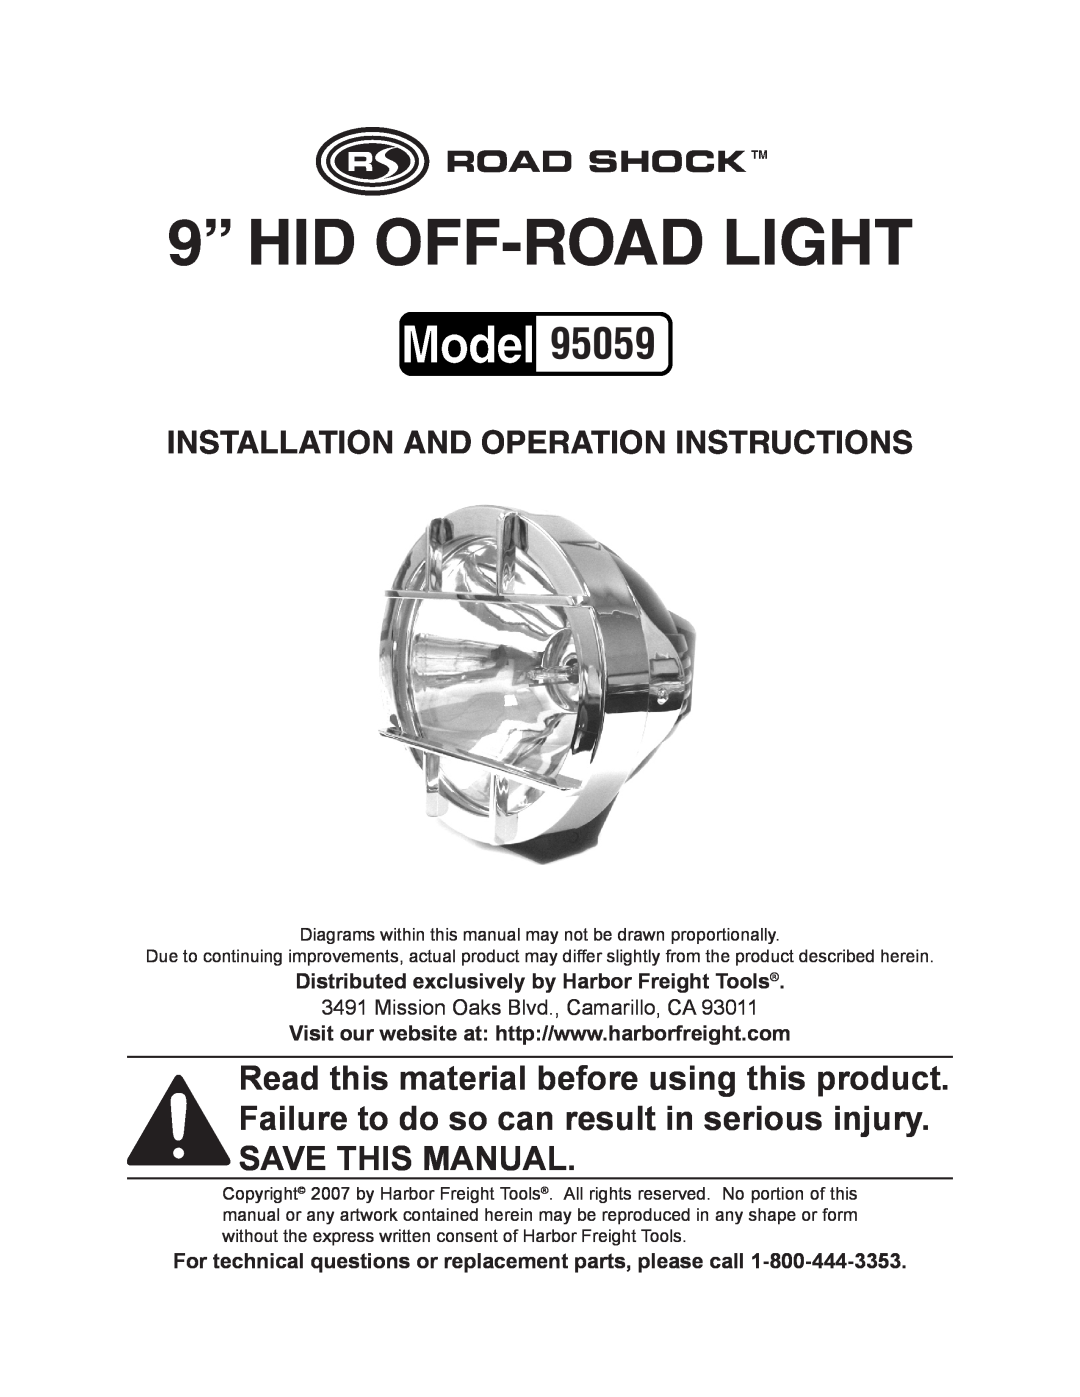 Harbor Freight Tools 95059 manual Distributed exclusively by Harbor Freight Tools, 9” HID OFF-ROADLIGHT 